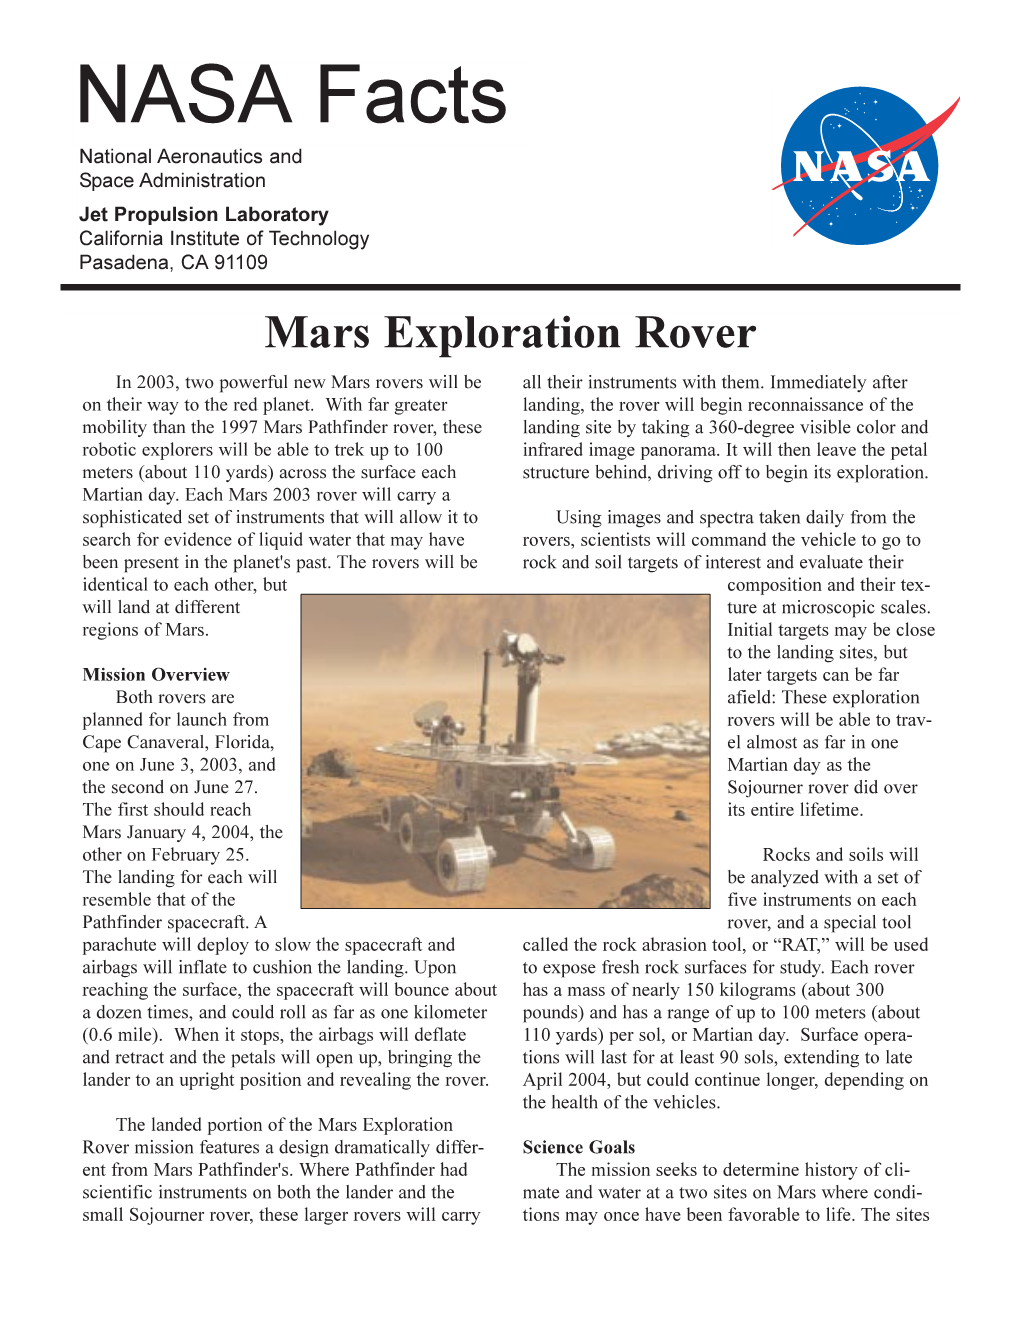 Mars Exploration Rover in 2003, Two Powerful New Mars Rovers Will Be All Their Instruments with Them